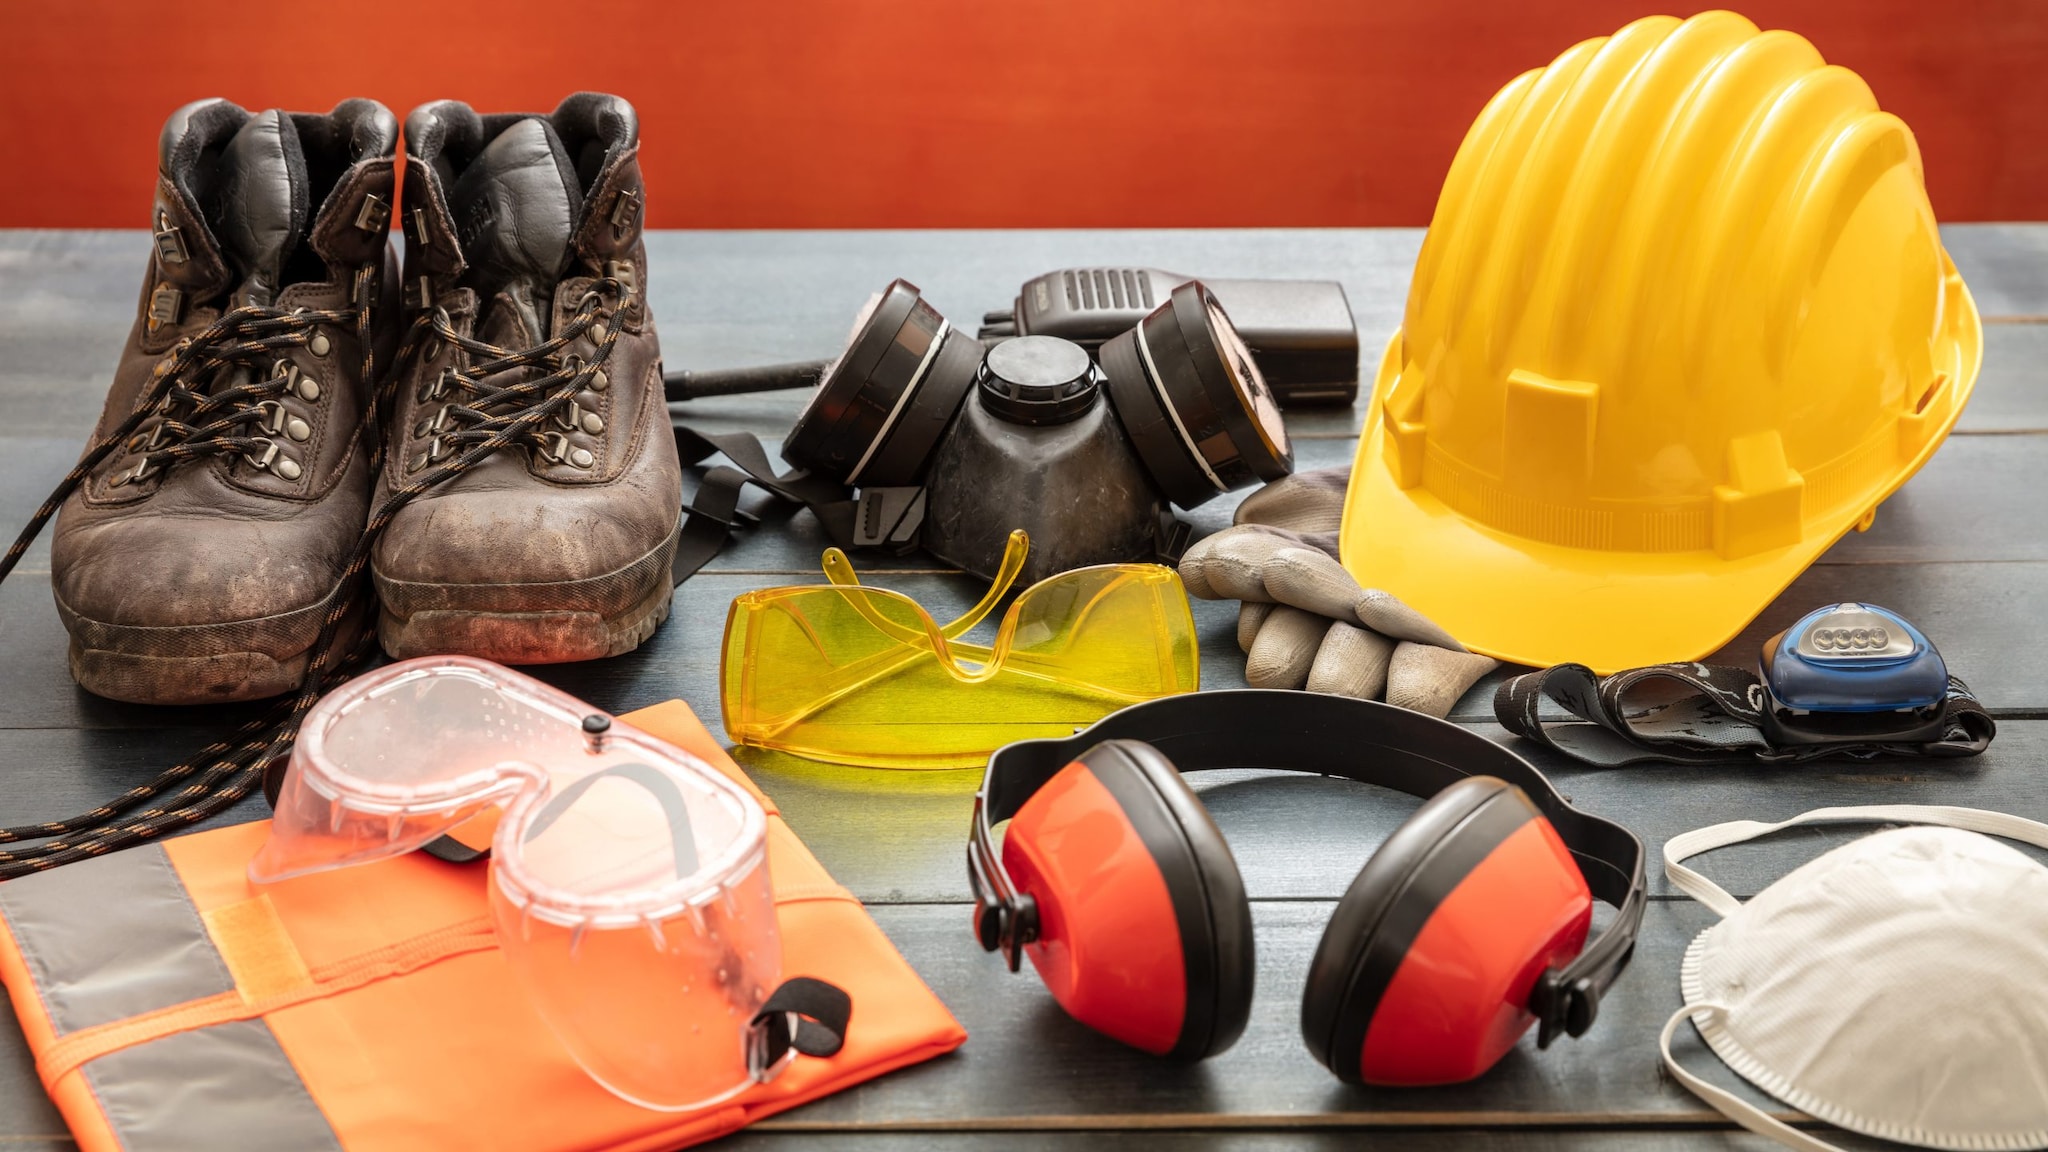 Table with personal protective equipment including, hard hat, respirator, goggles, mask, and boots